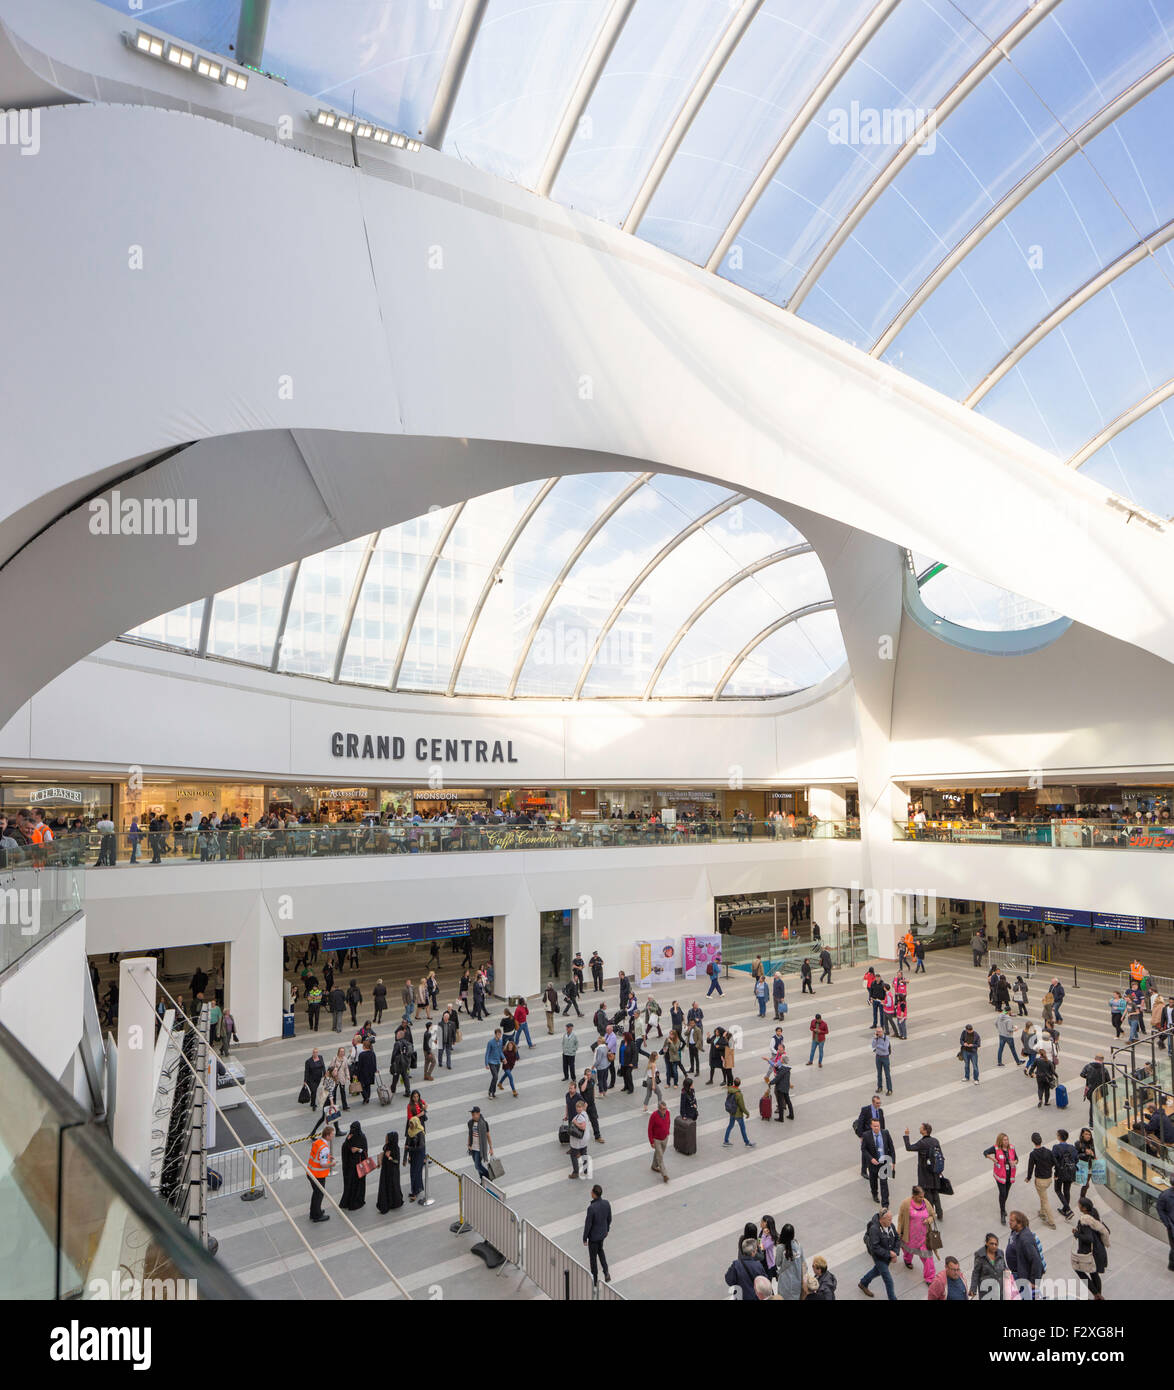 Birmingham, UK. 24th September, 2015. 24th September 2015. The opening day of Birmingham's Grand Central shopping center and the renovated New Street Station, Birmingham, West Midlands, England, UK Thousands of shoppers visit the new complex on it's opening day. Credit:  paul weston/Alamy Live News Stock Photo